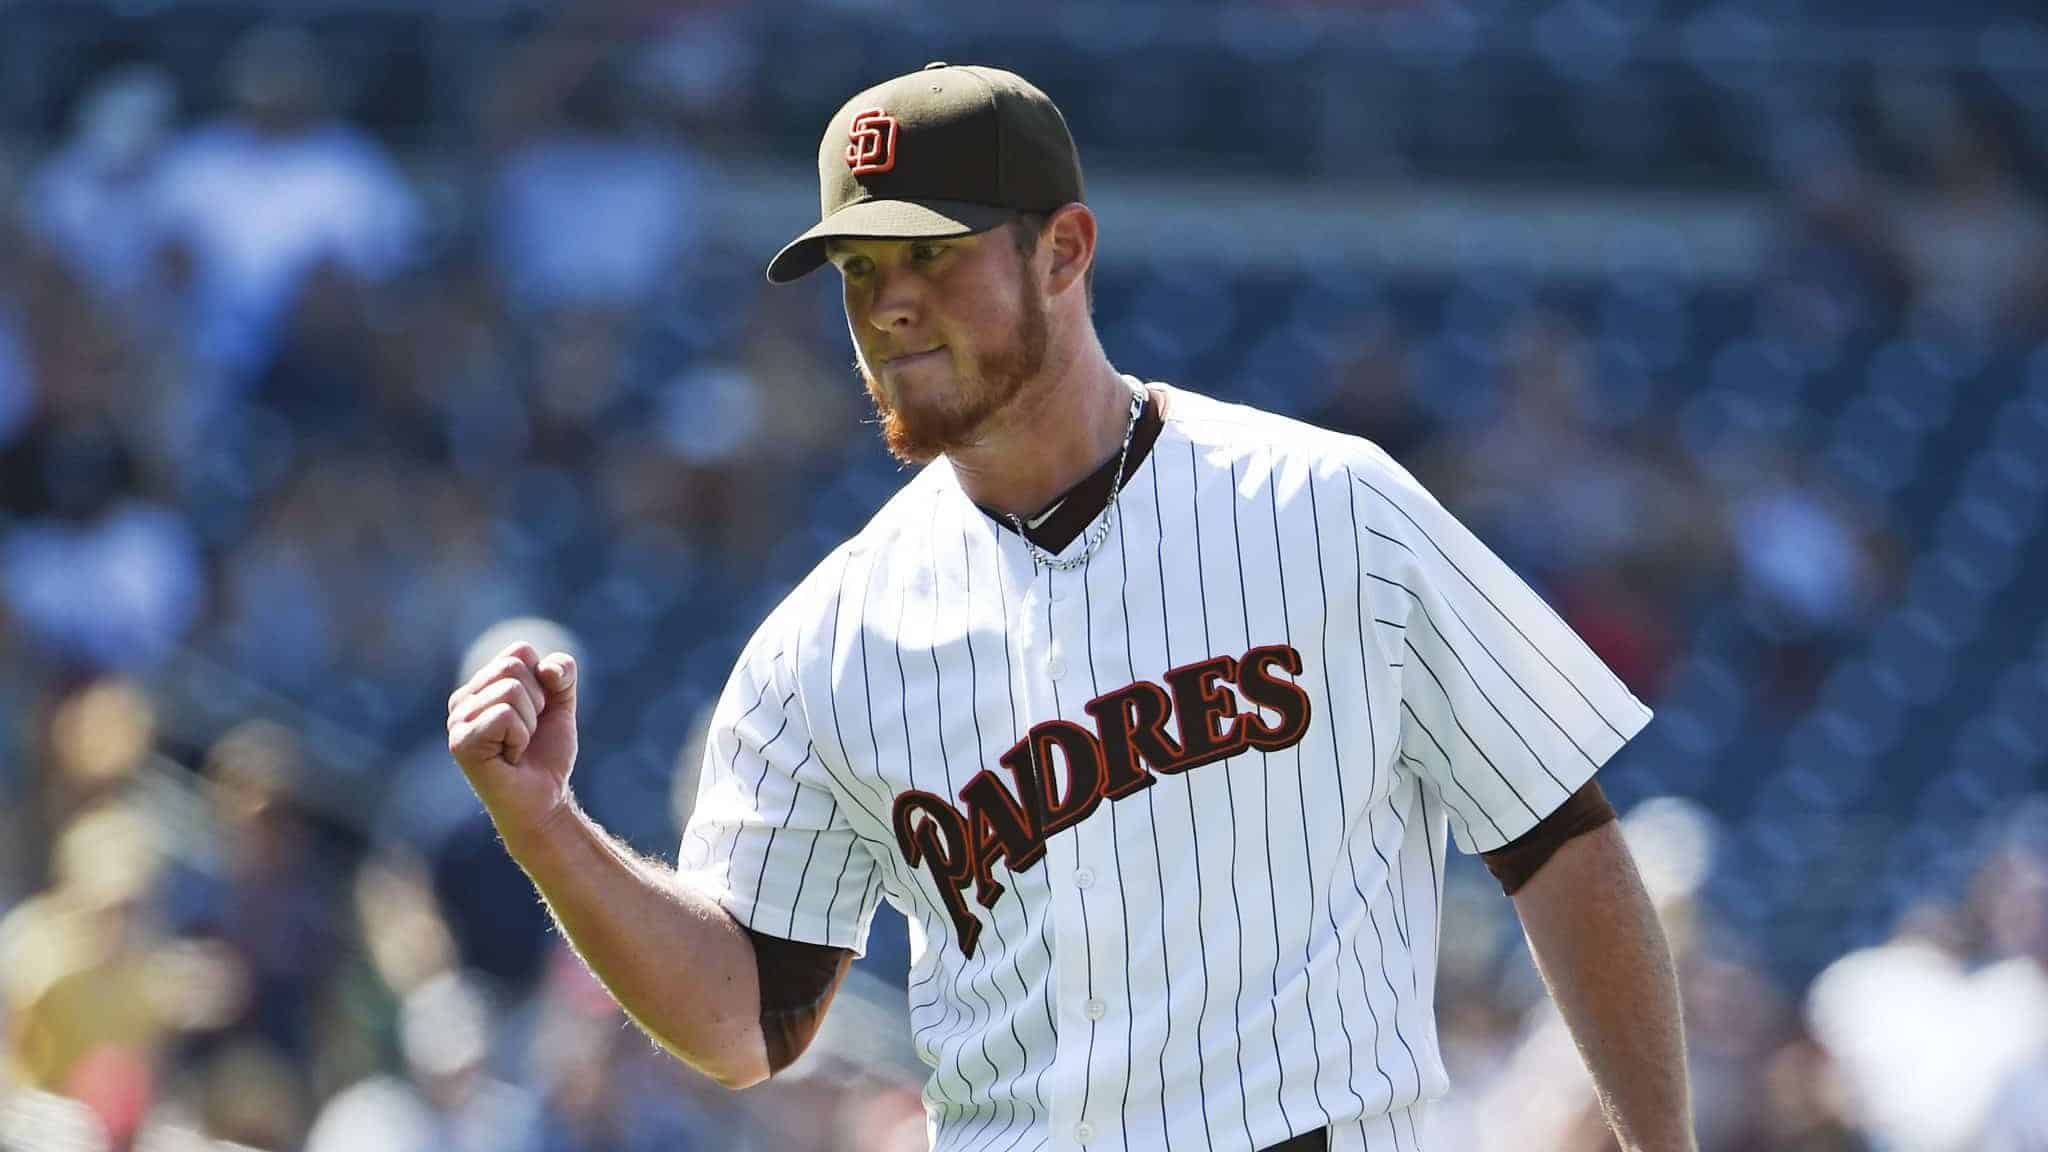 SAN DIEGO, CA - AUGUST 19: Craig Kimbrel #46 of the San Diego Padres pumps his fist after a 3-2 win over the Atlanta Braves in a baseball game at Petco Park August 19, 2015 in San Diego, California.